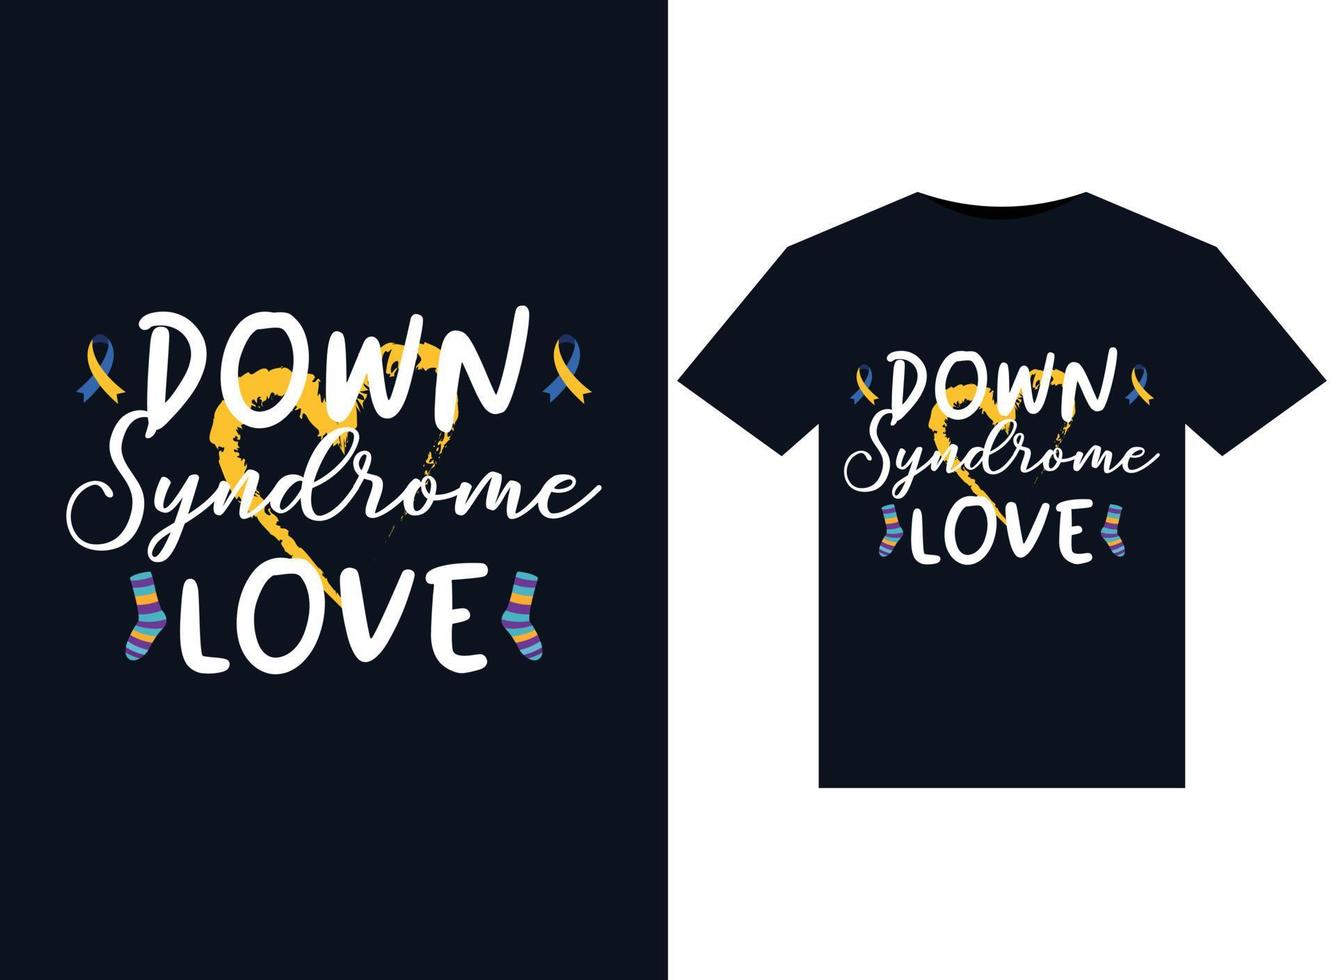 Down Syndrome Love illustrations for print-ready T-Shirts design vector